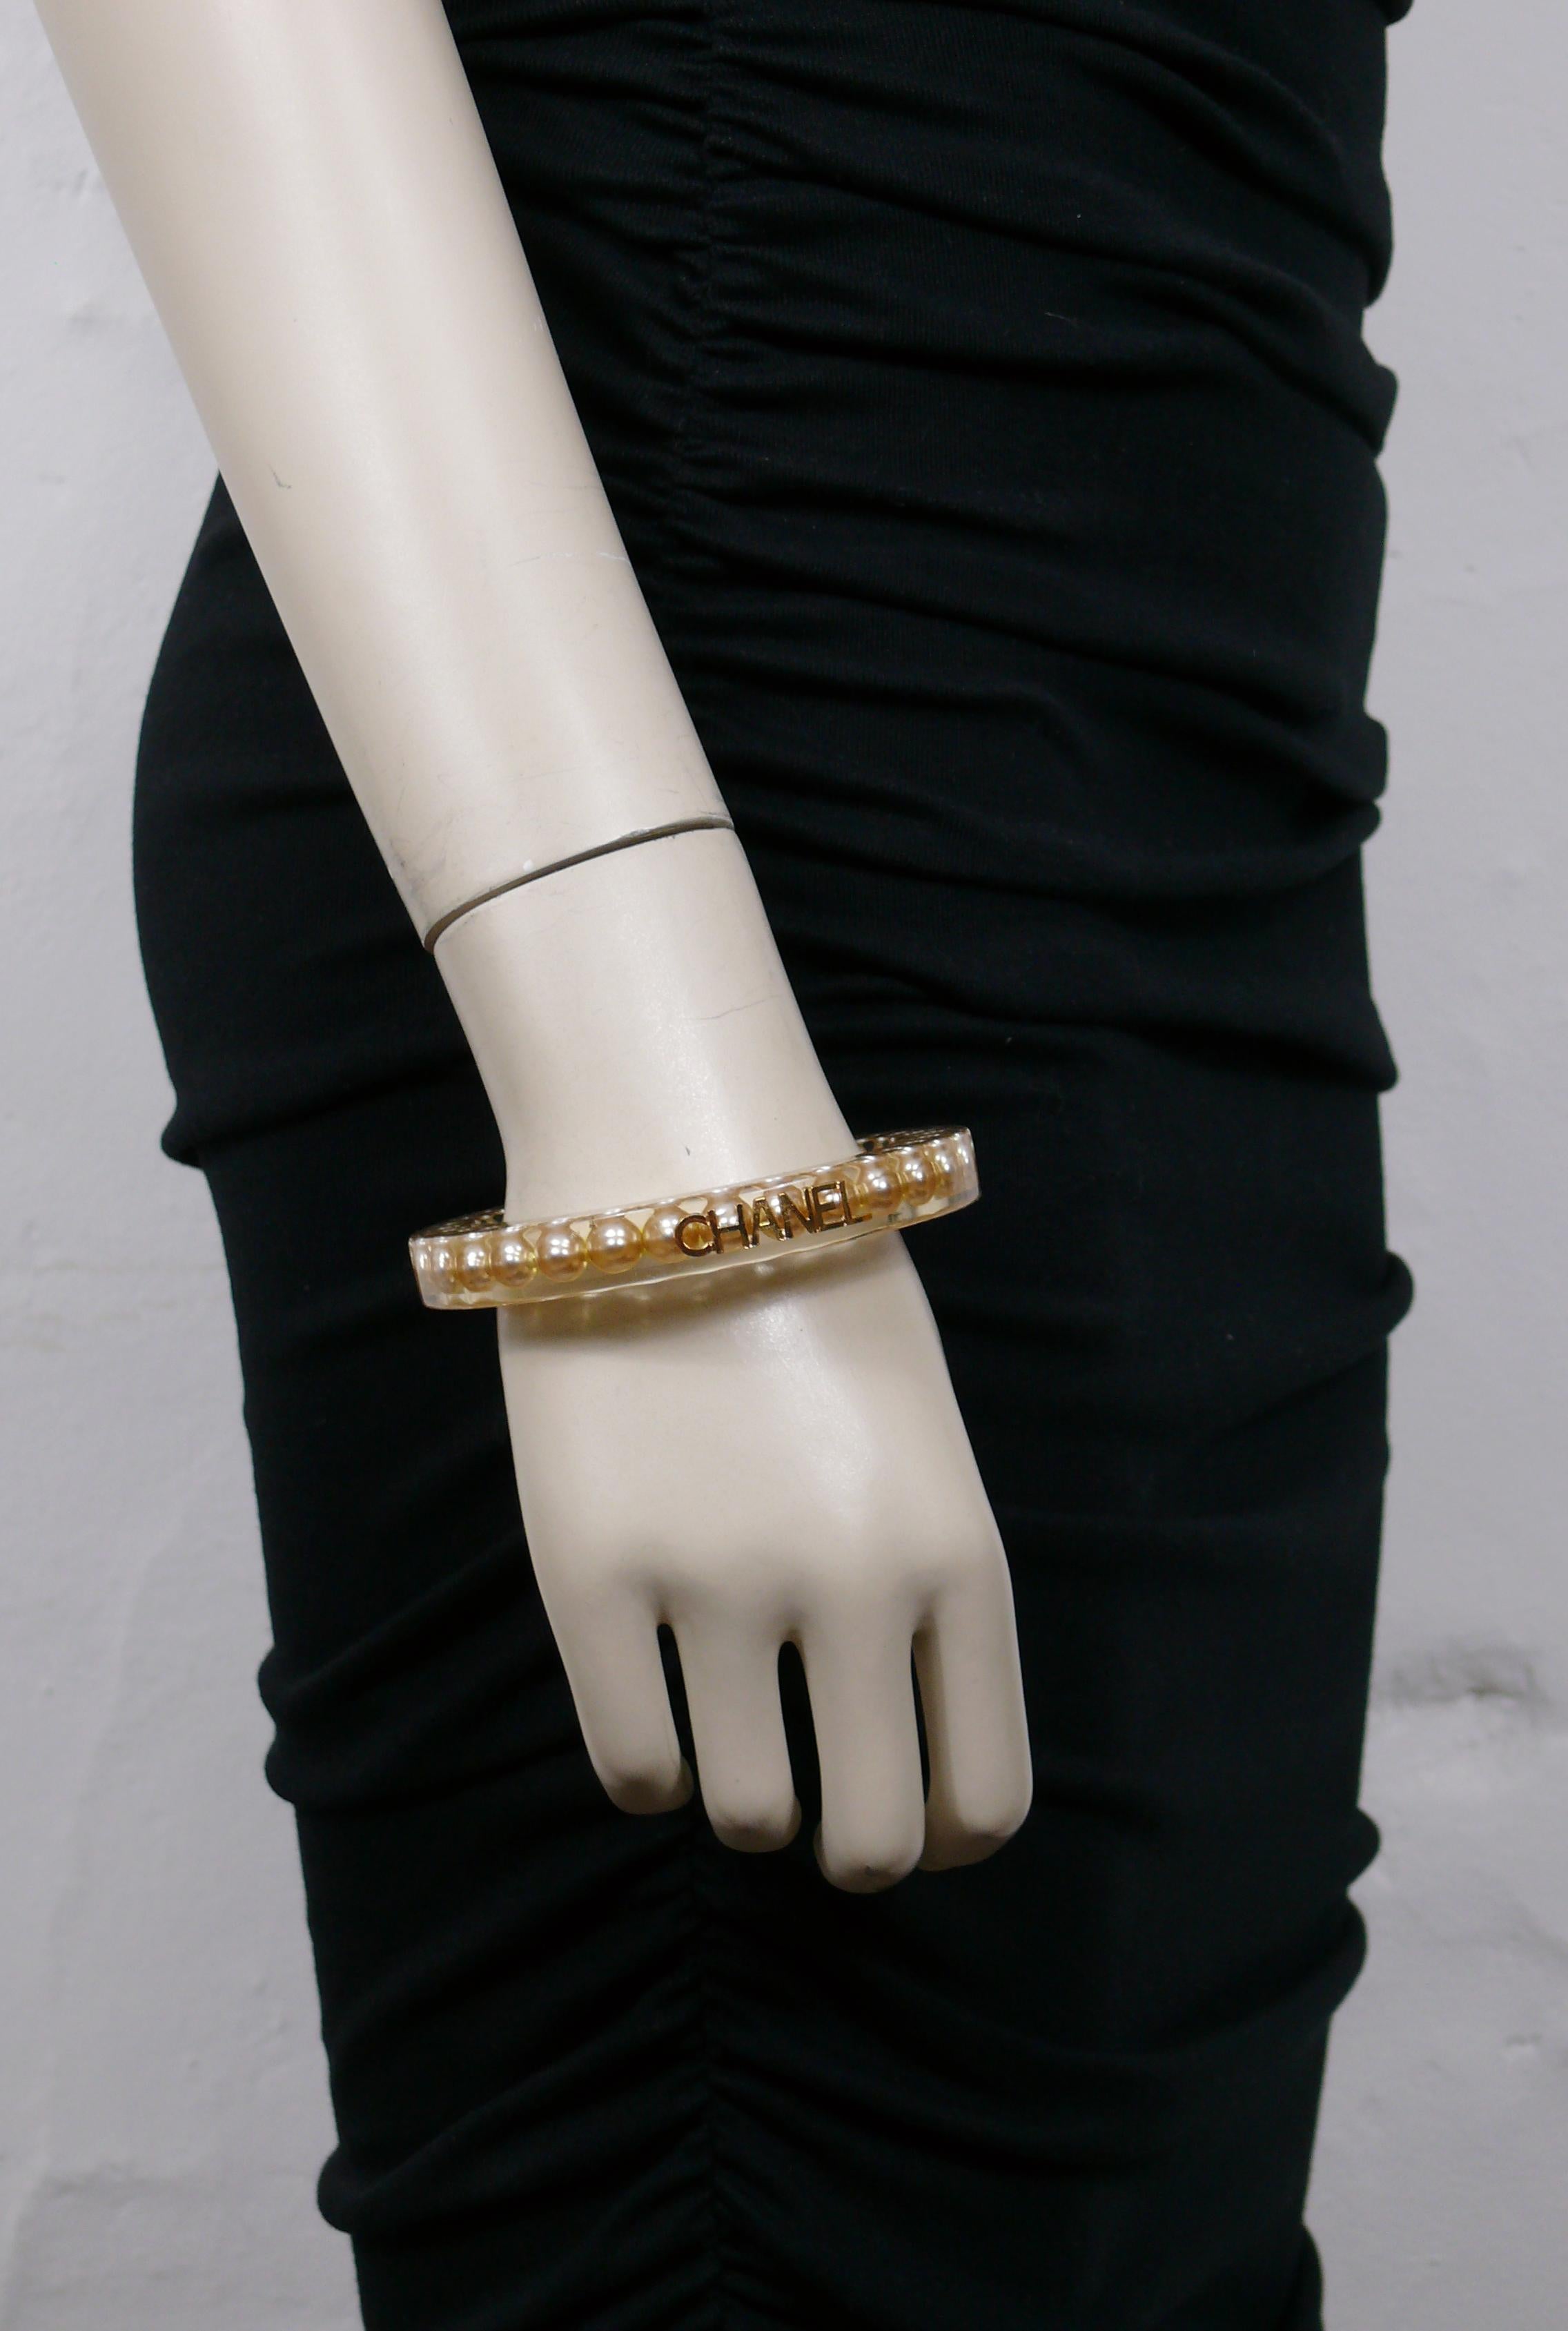 CHANEL by KARL LAGERFELD vintage lucite bangle bracelet embellished with faux pearl inlaid and gold tone CHANEL logo.

Spring collection 1997.

Embossed CHANEL 97 P Made in France.

Indicative measurements : inner circumference approx. 20.74 cm